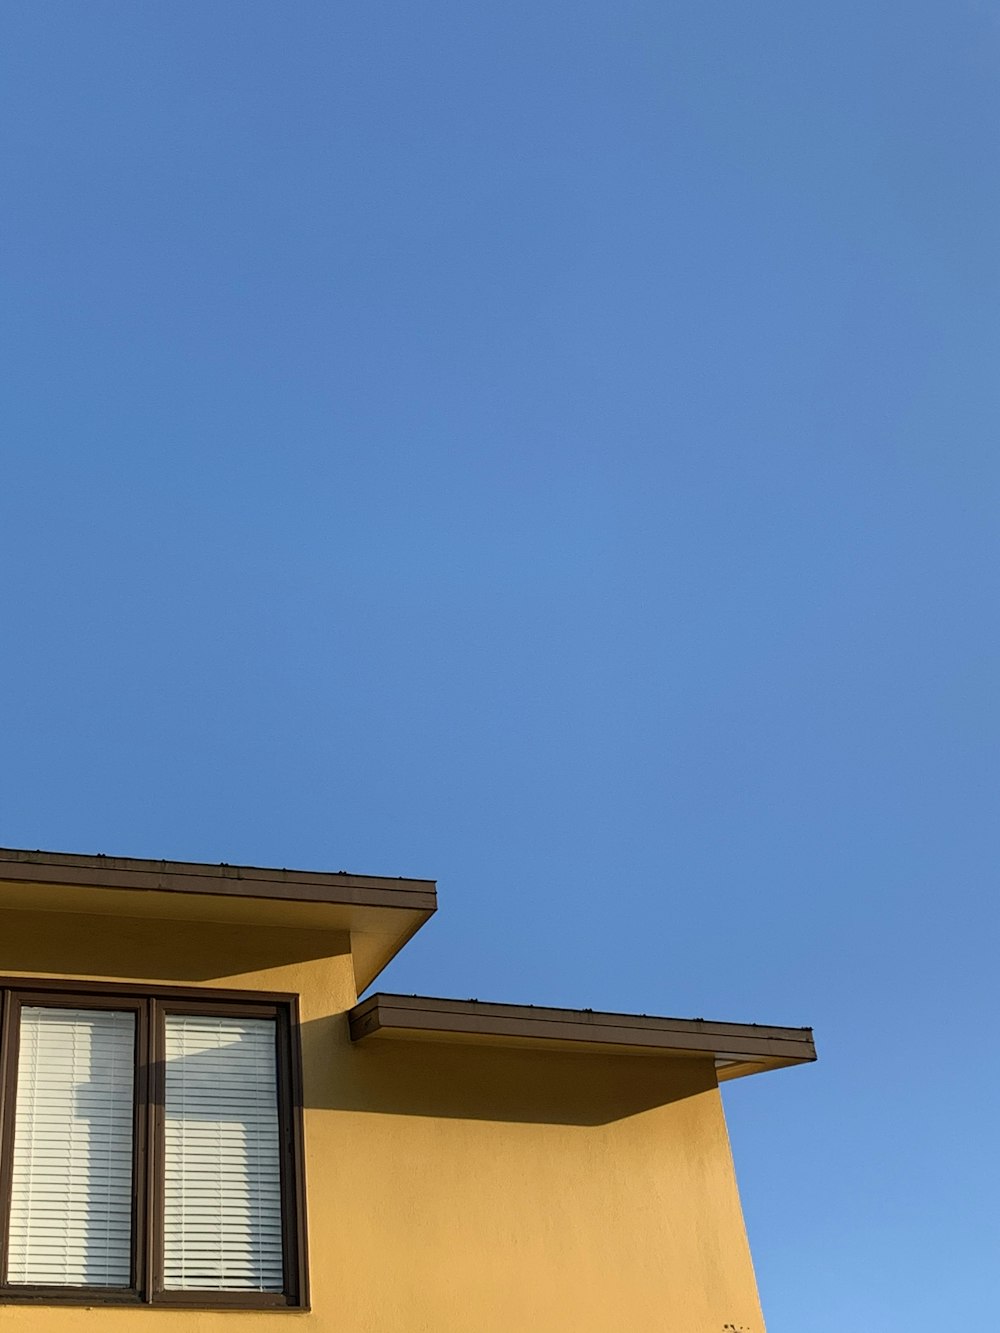 yellow and brown concrete house under blue sky during daytime